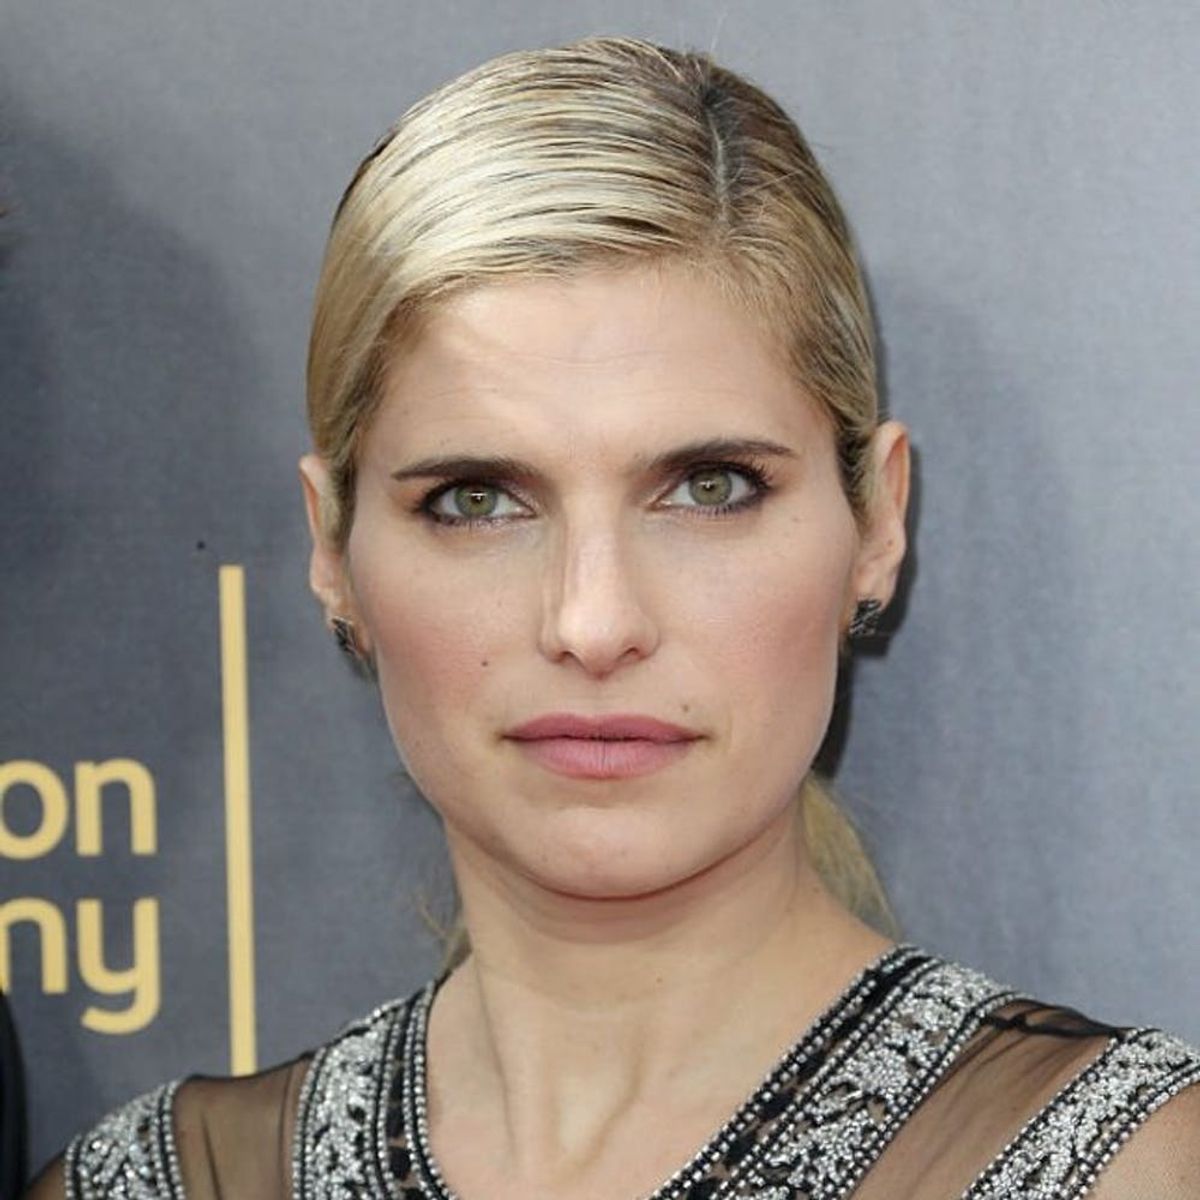 Lake Bell Just Debuted Her Baby Bump in the Most Glam Way Possible